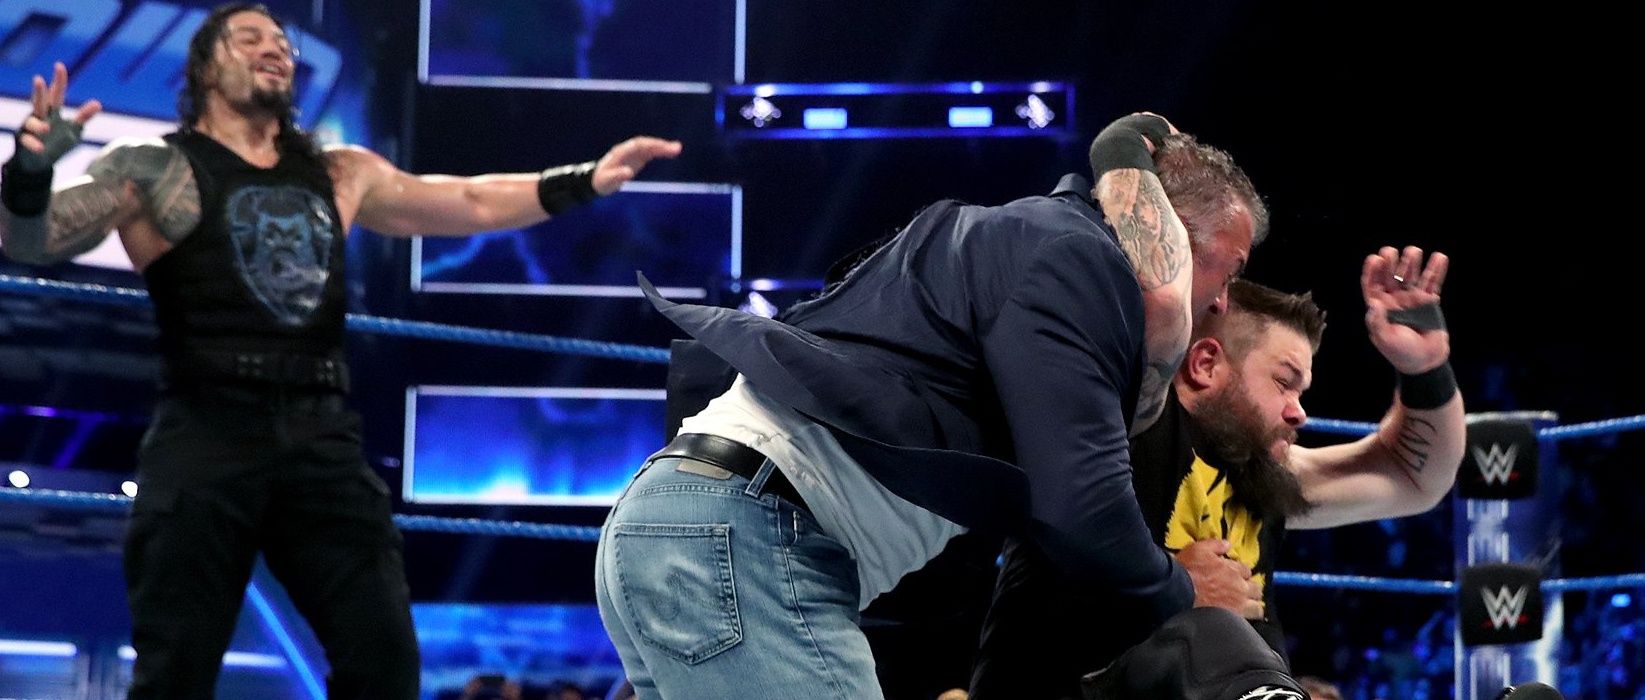 Roman Reigns watches Kevin Owens hit a stunner on Shane McMahon